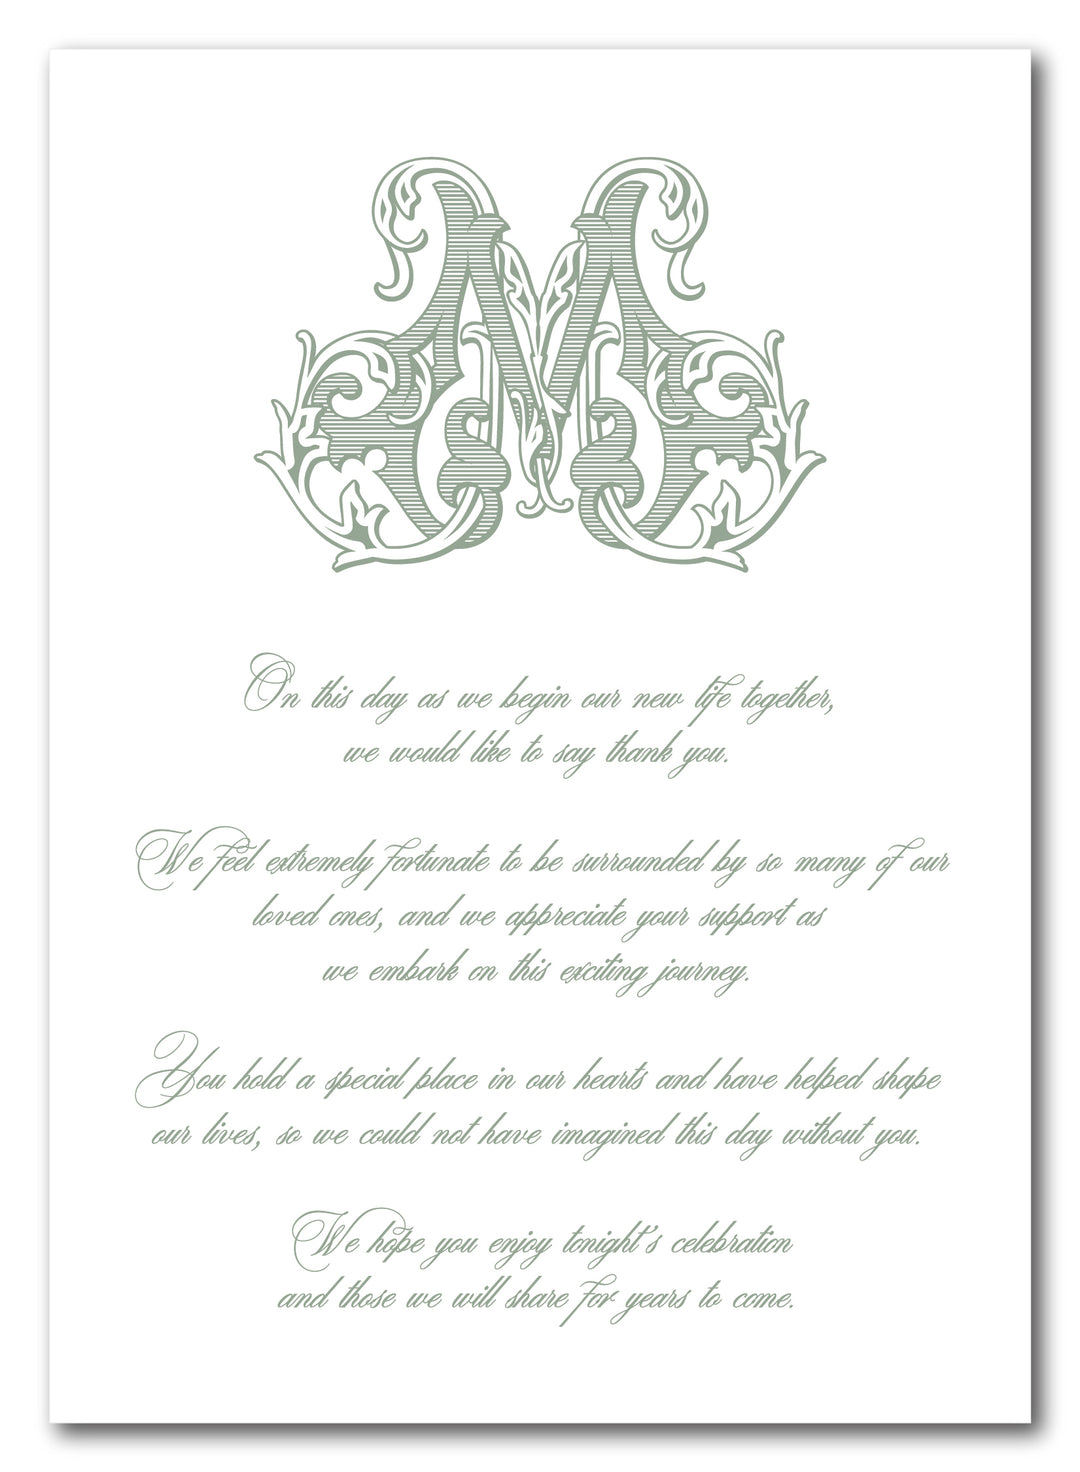 The Natalie Thank You Place Setting Card